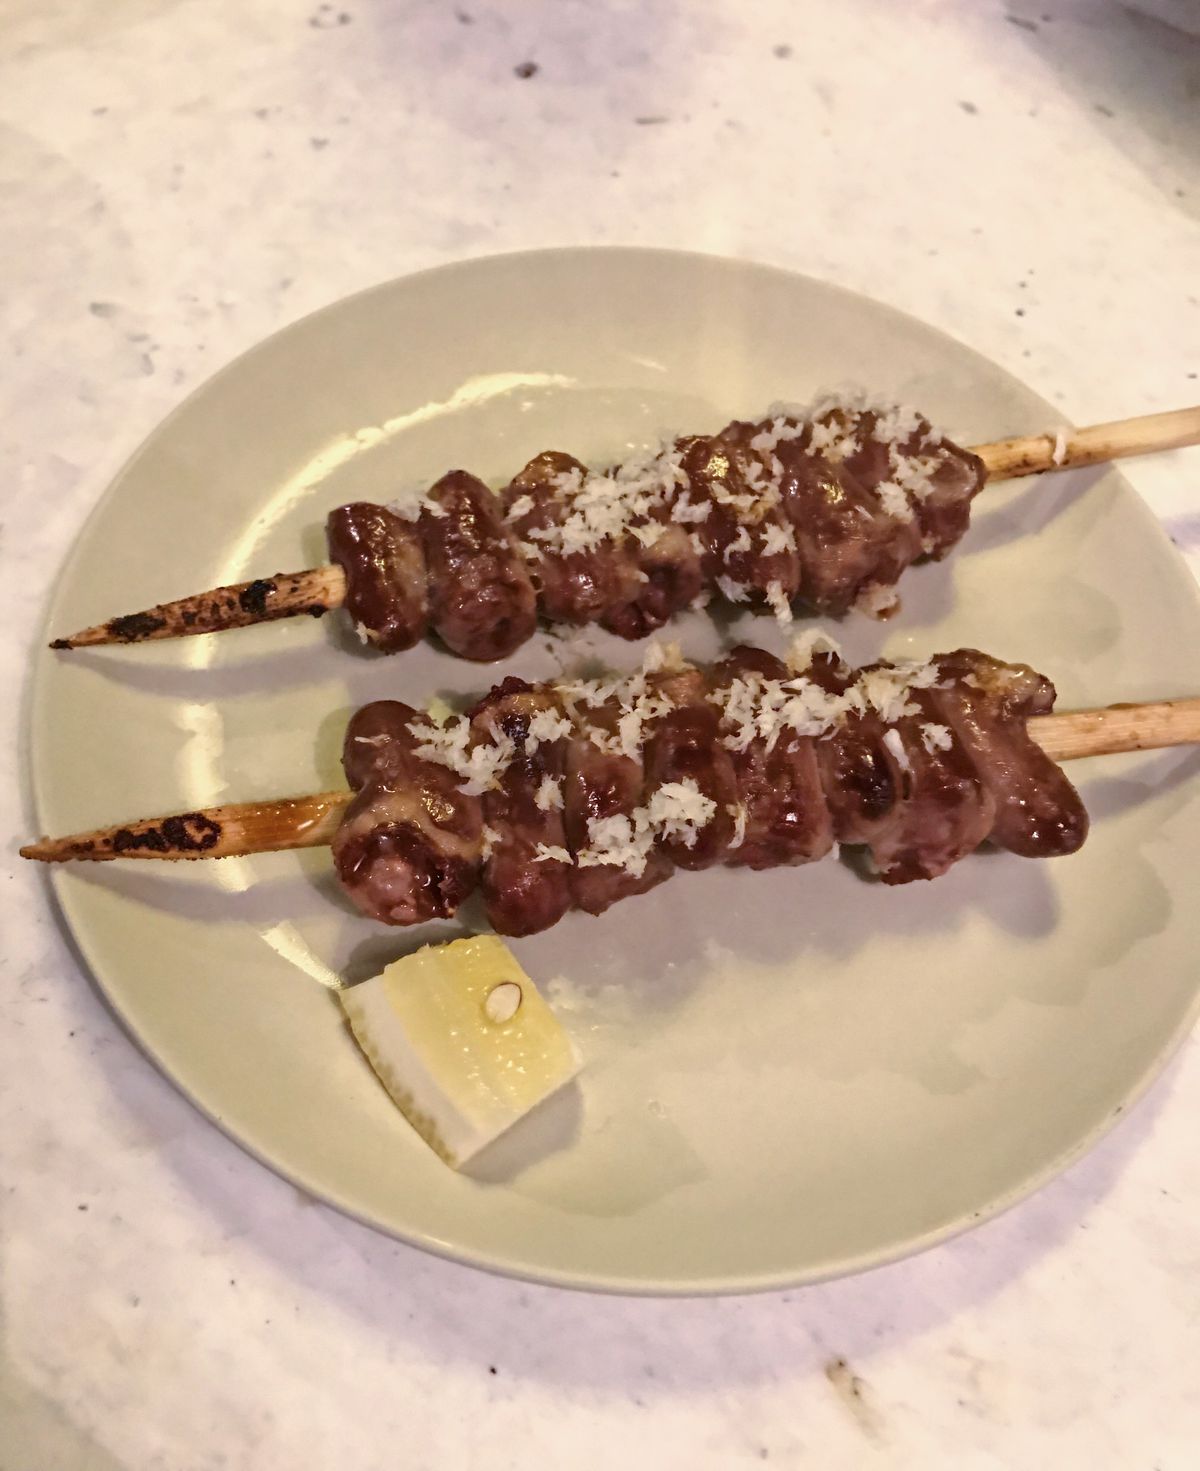 Chicken heart yakitori at Peg, the wine bar and restaurant from P. Franco and Bright